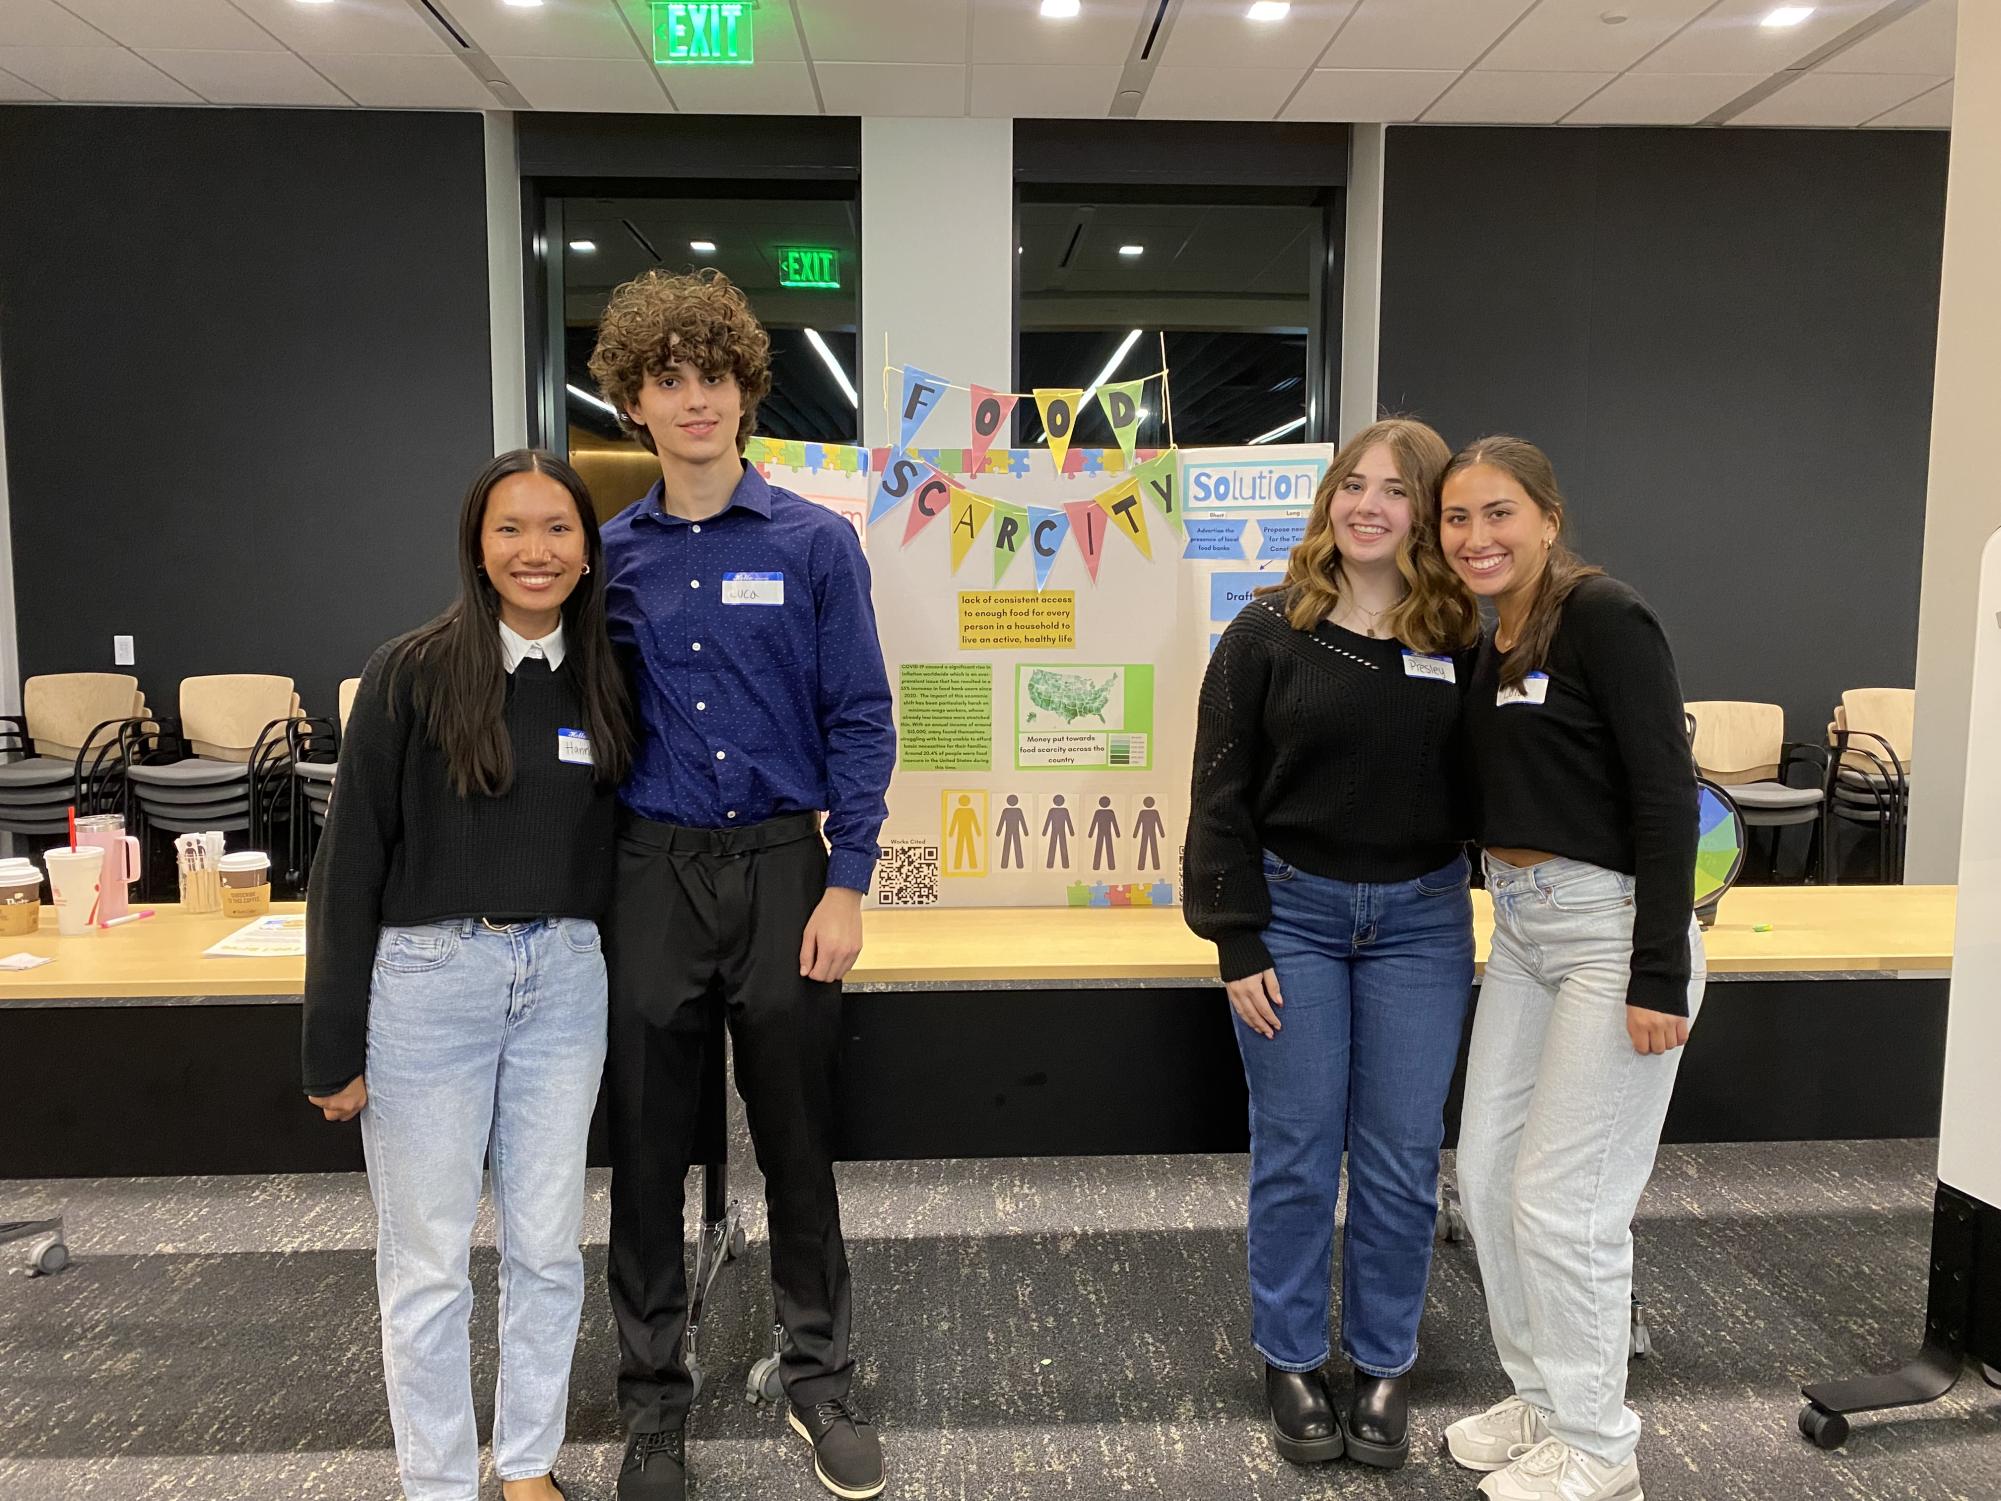 First year UNT Now! Students (from left to right) Hannah Phares, Luca Rusu, Presley Sockwell, and Lola Jimenez, presenting their semester long project.